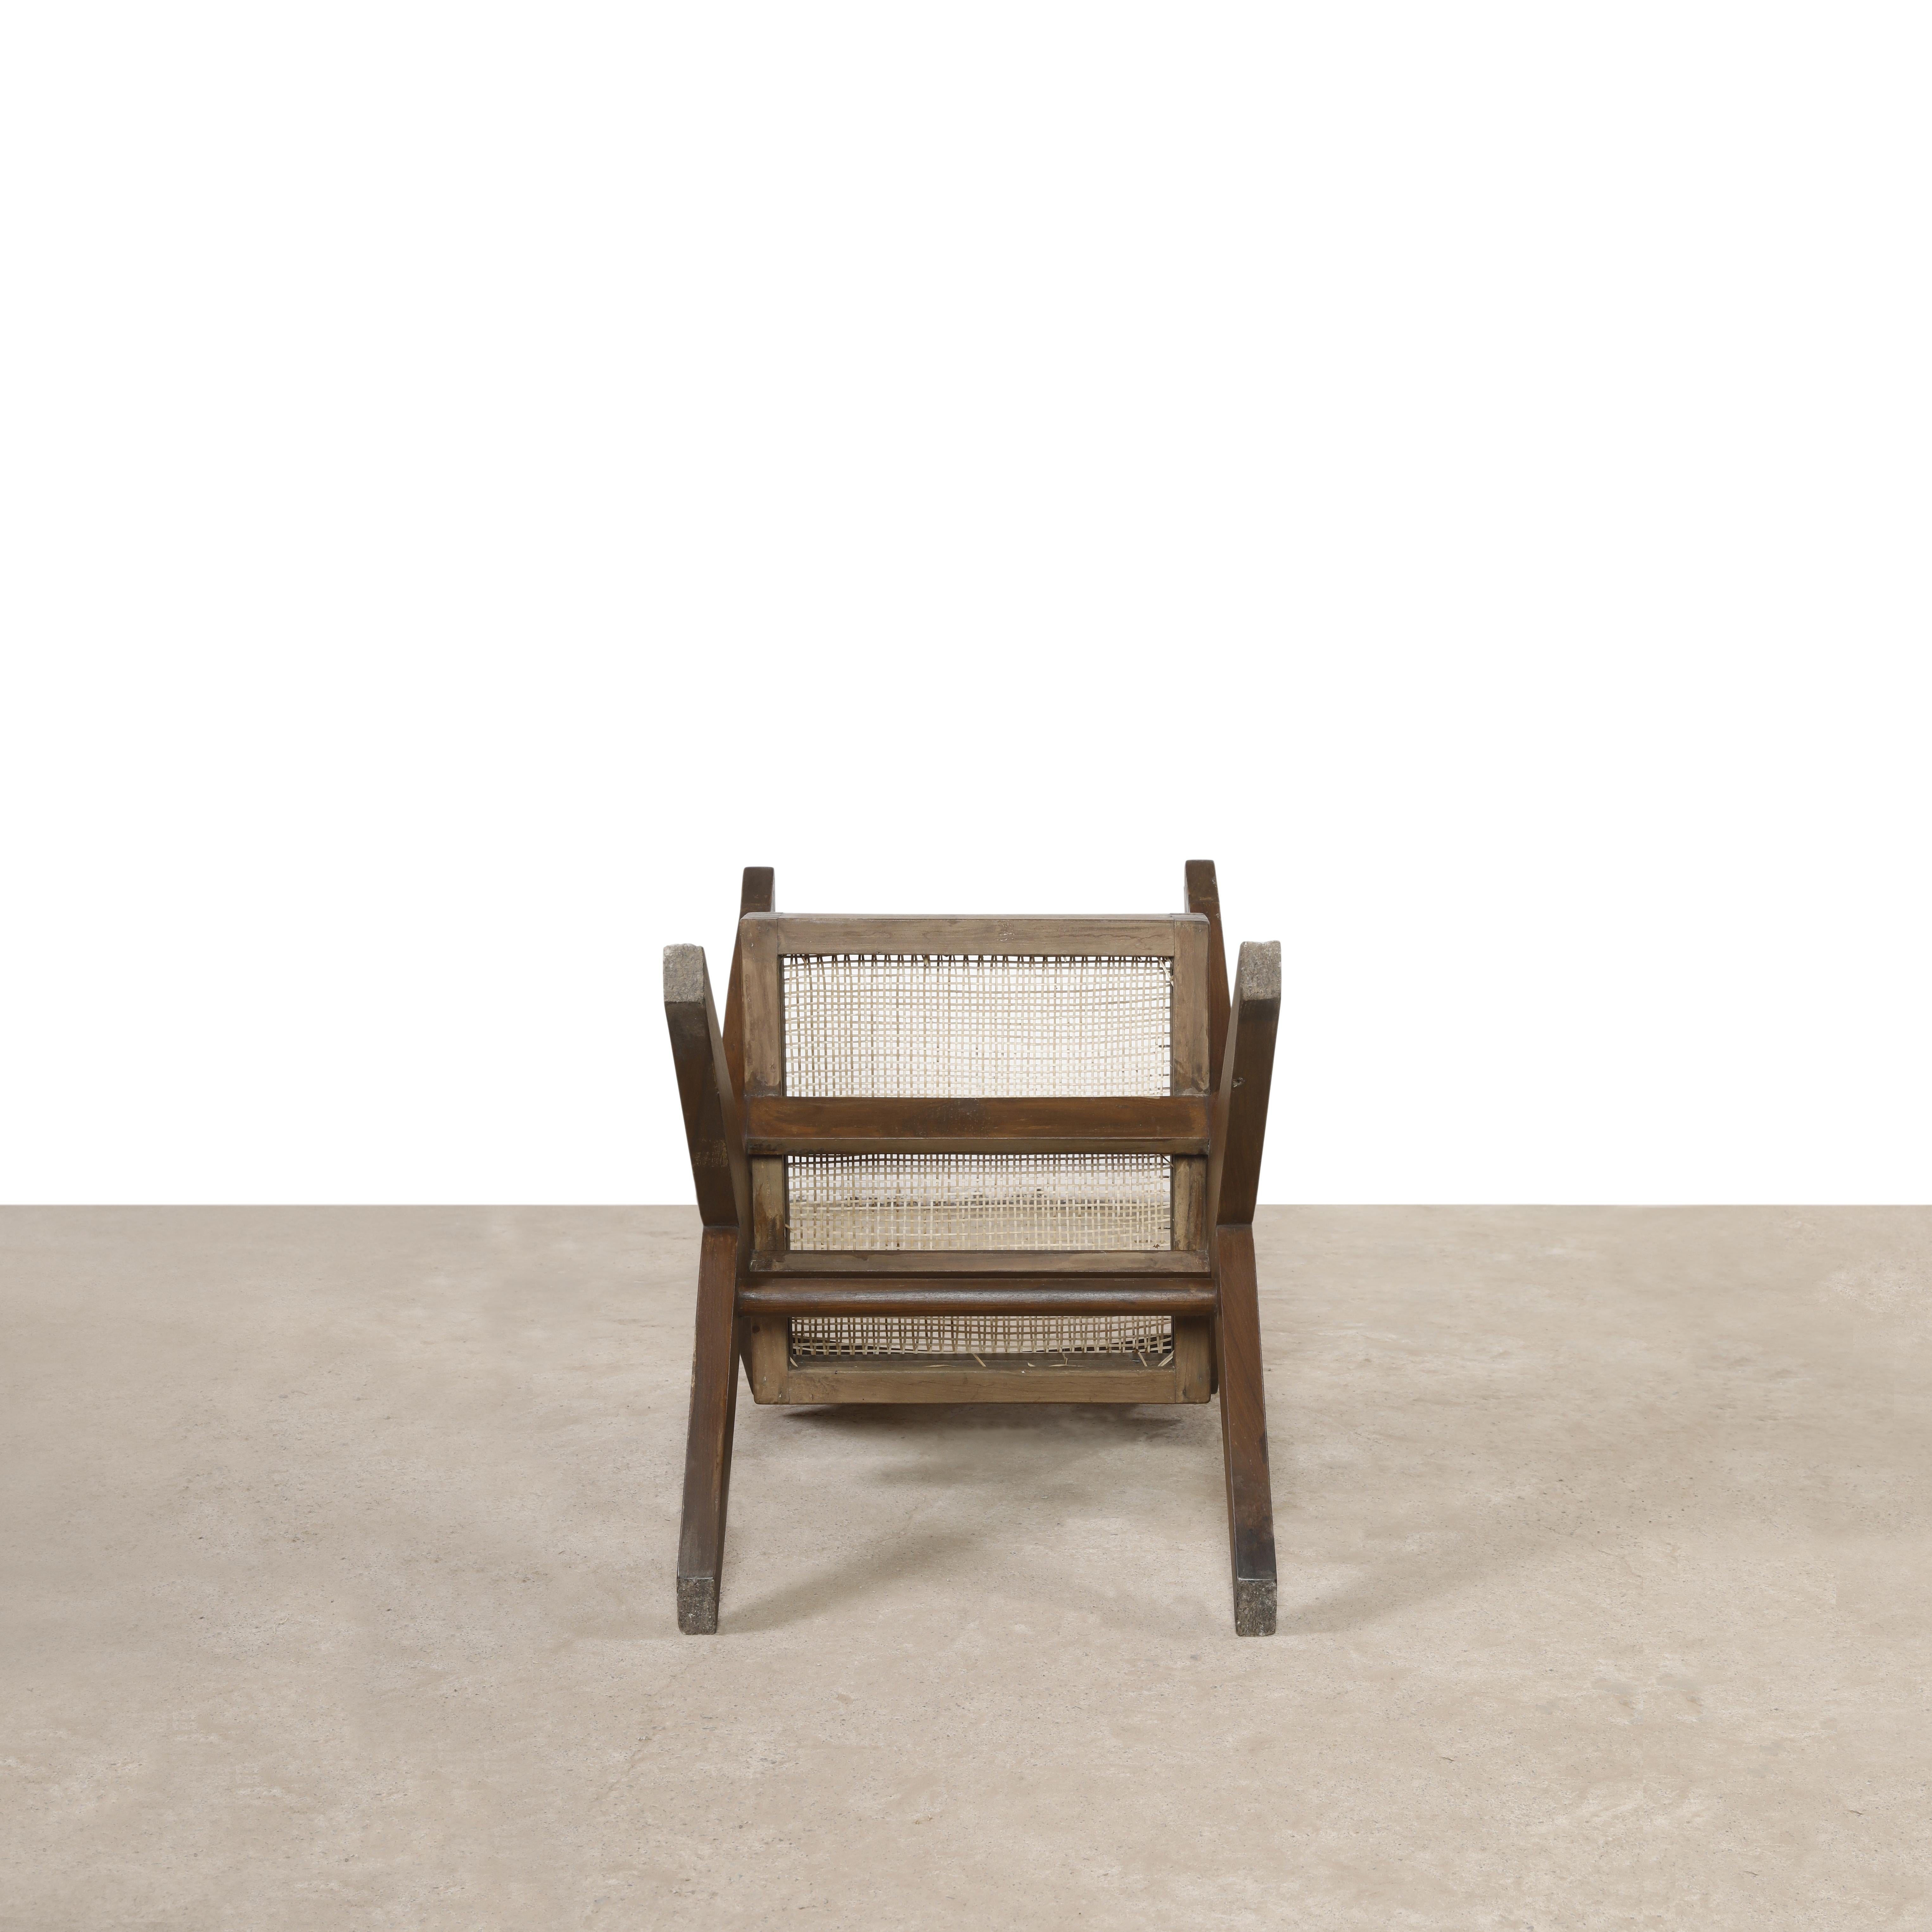 Mid-20th Century Pierre Jeanneret Pj-SI-46-a Office Armchair / Authentic Mid-Century Modern For Sale